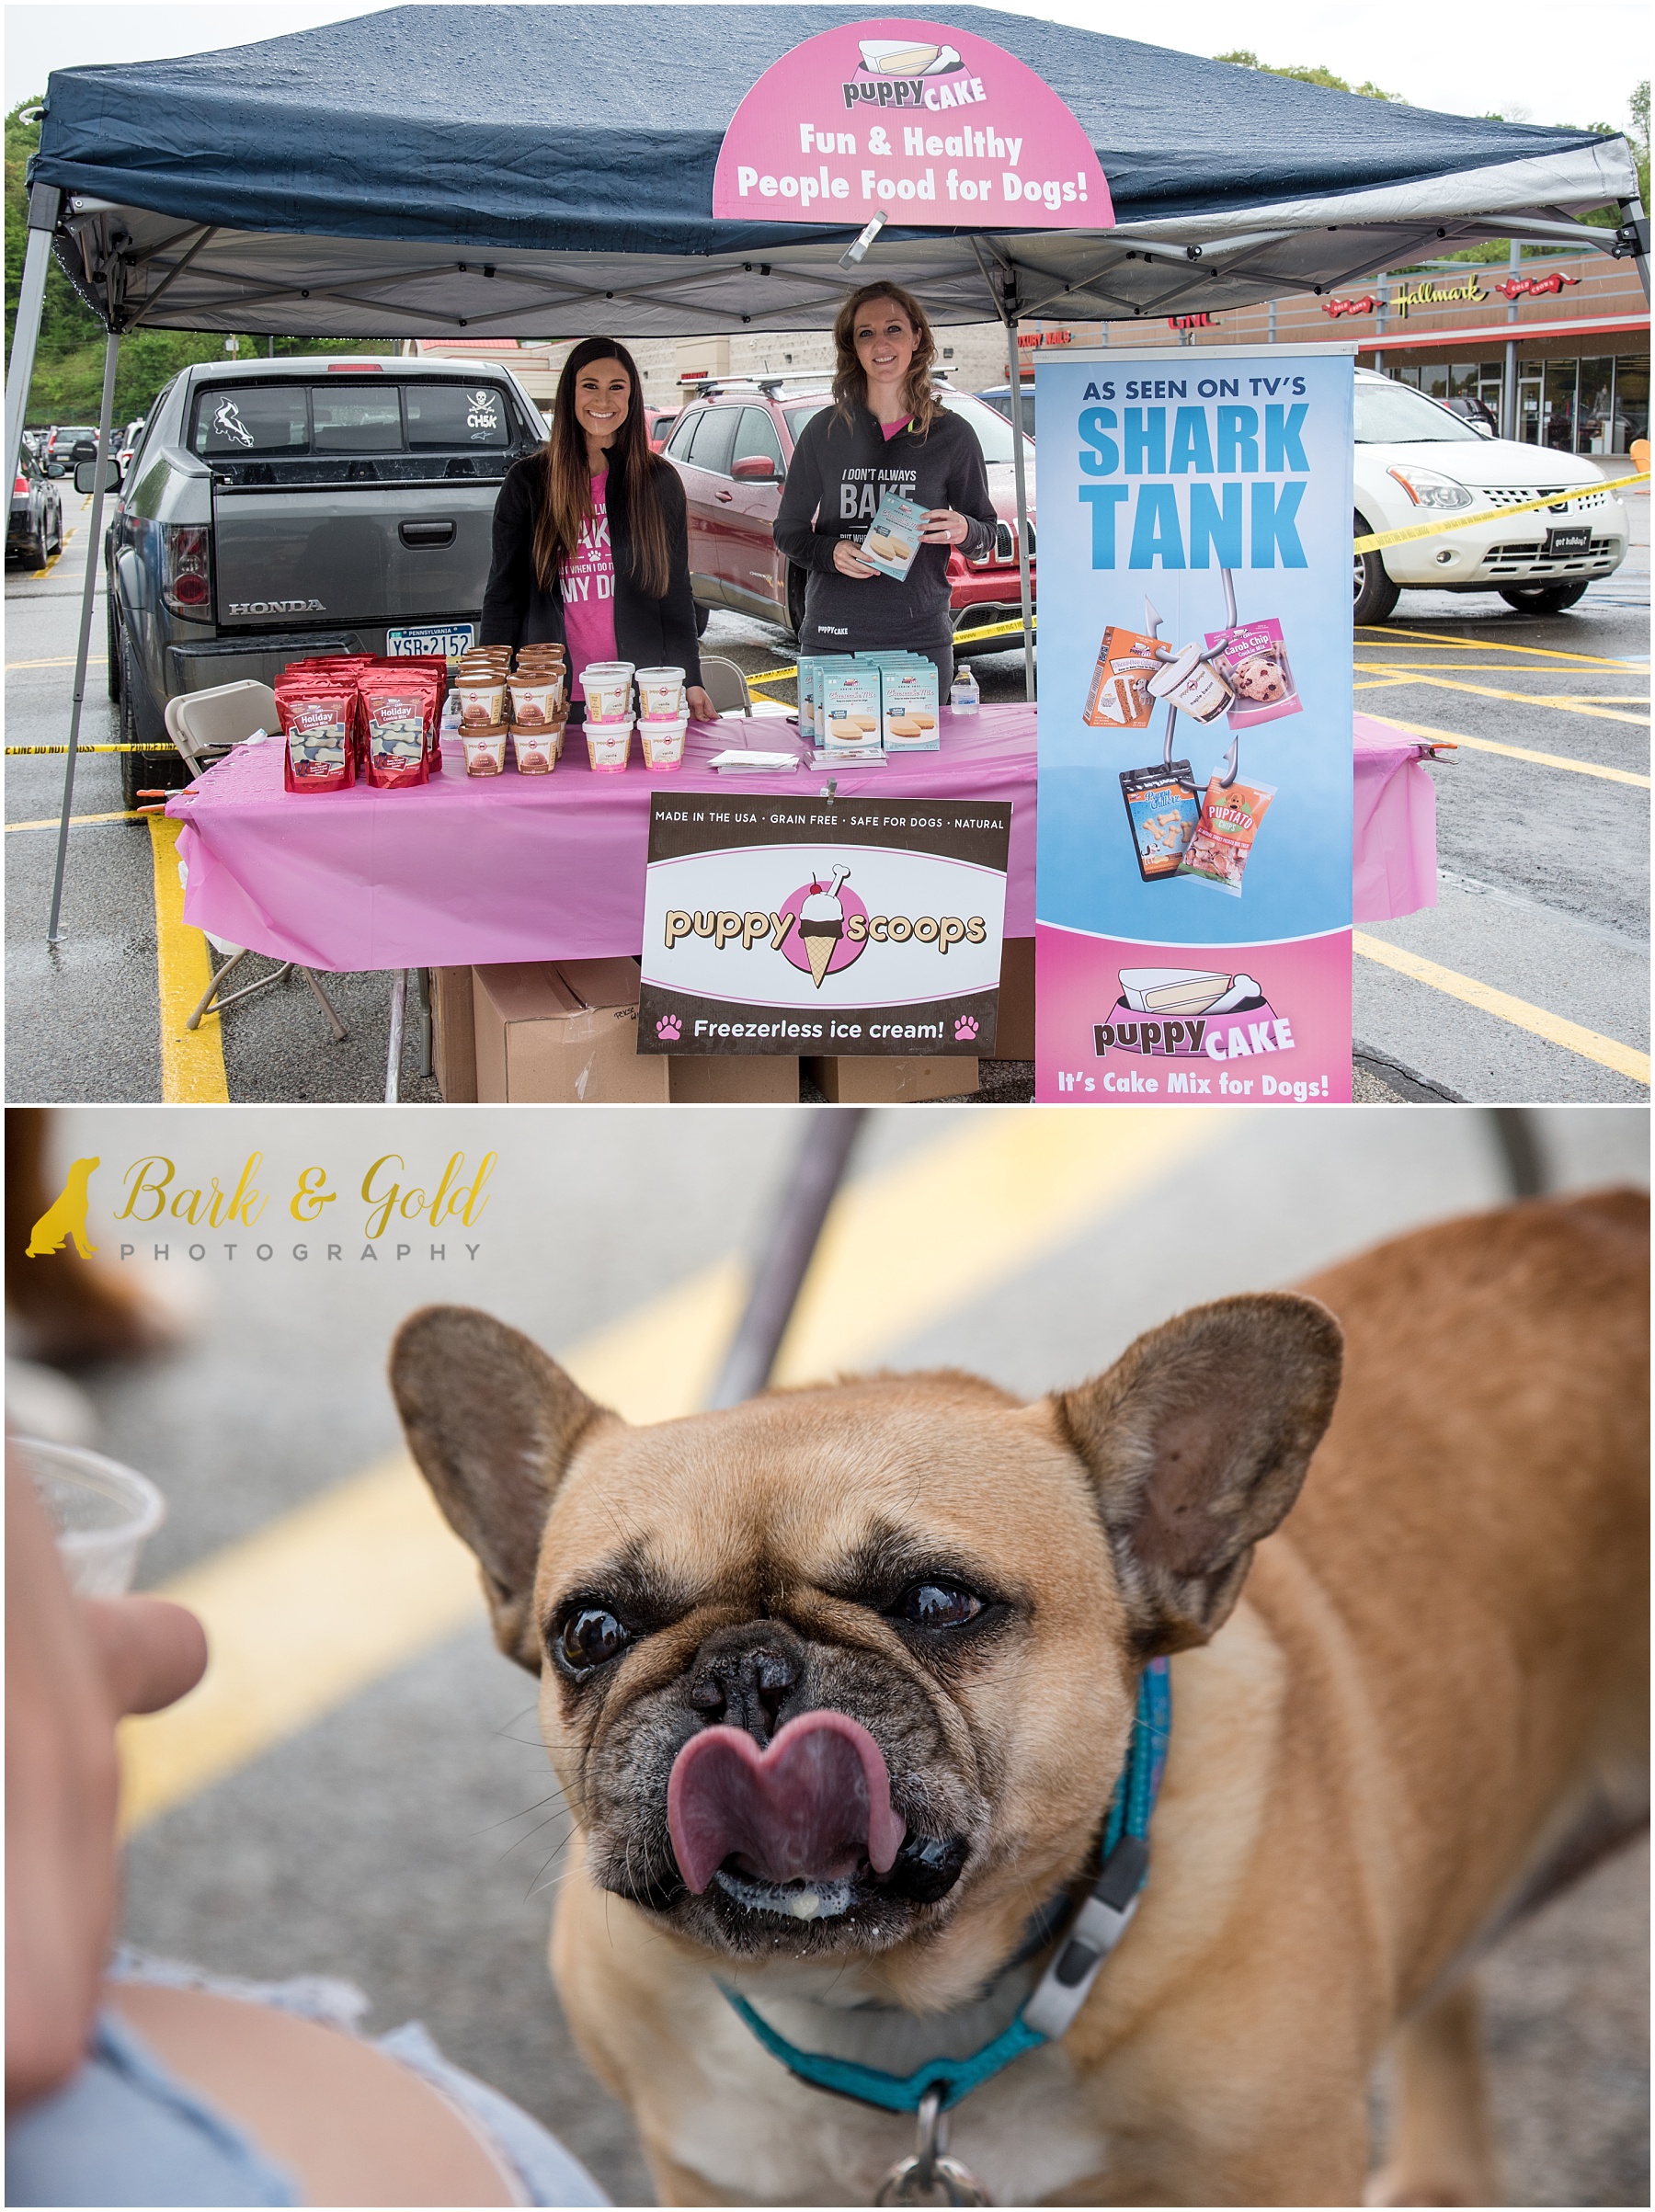 Boston terrier tasting Puppy Cake ice cream during Healthy Pet Day 2018